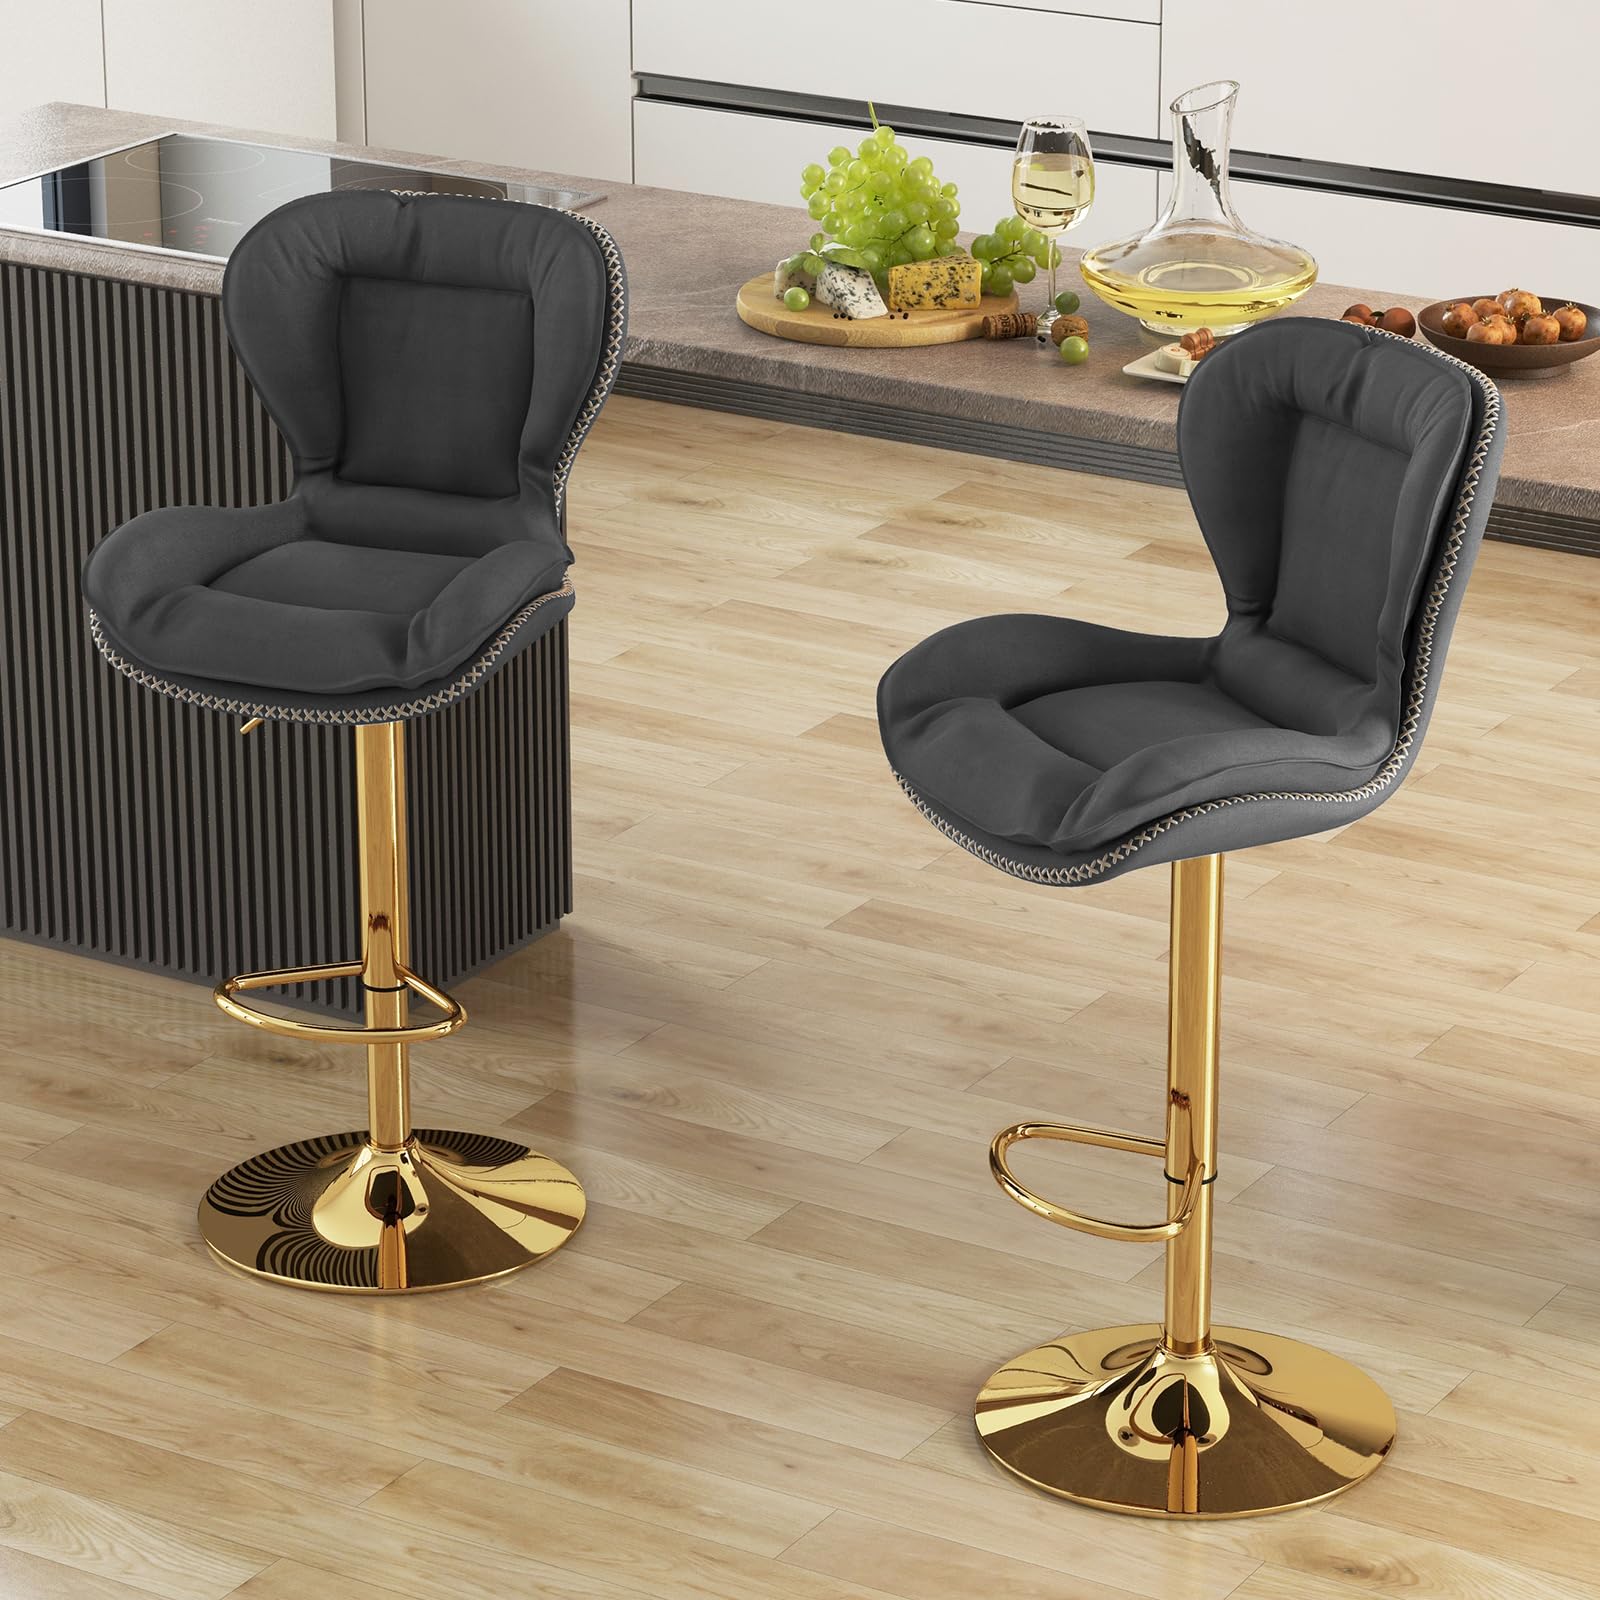 Giantex Adjustable Bar Stool Set of 2, PU Leather Bar Chairs with Padded Seat